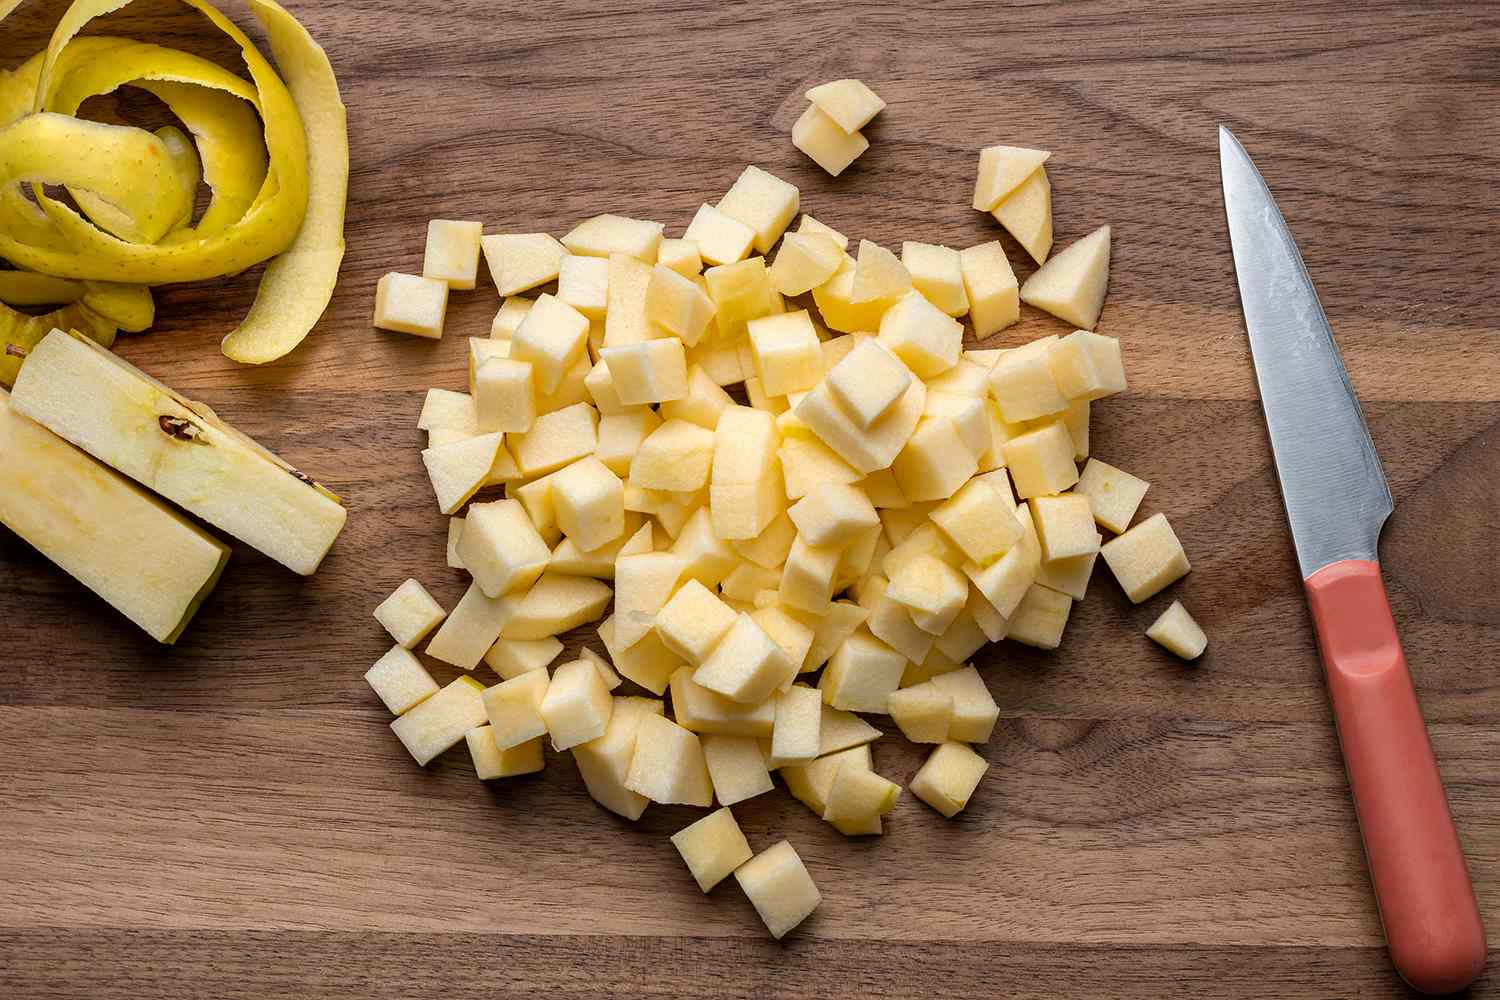 chopped cubed apples on a cutting board